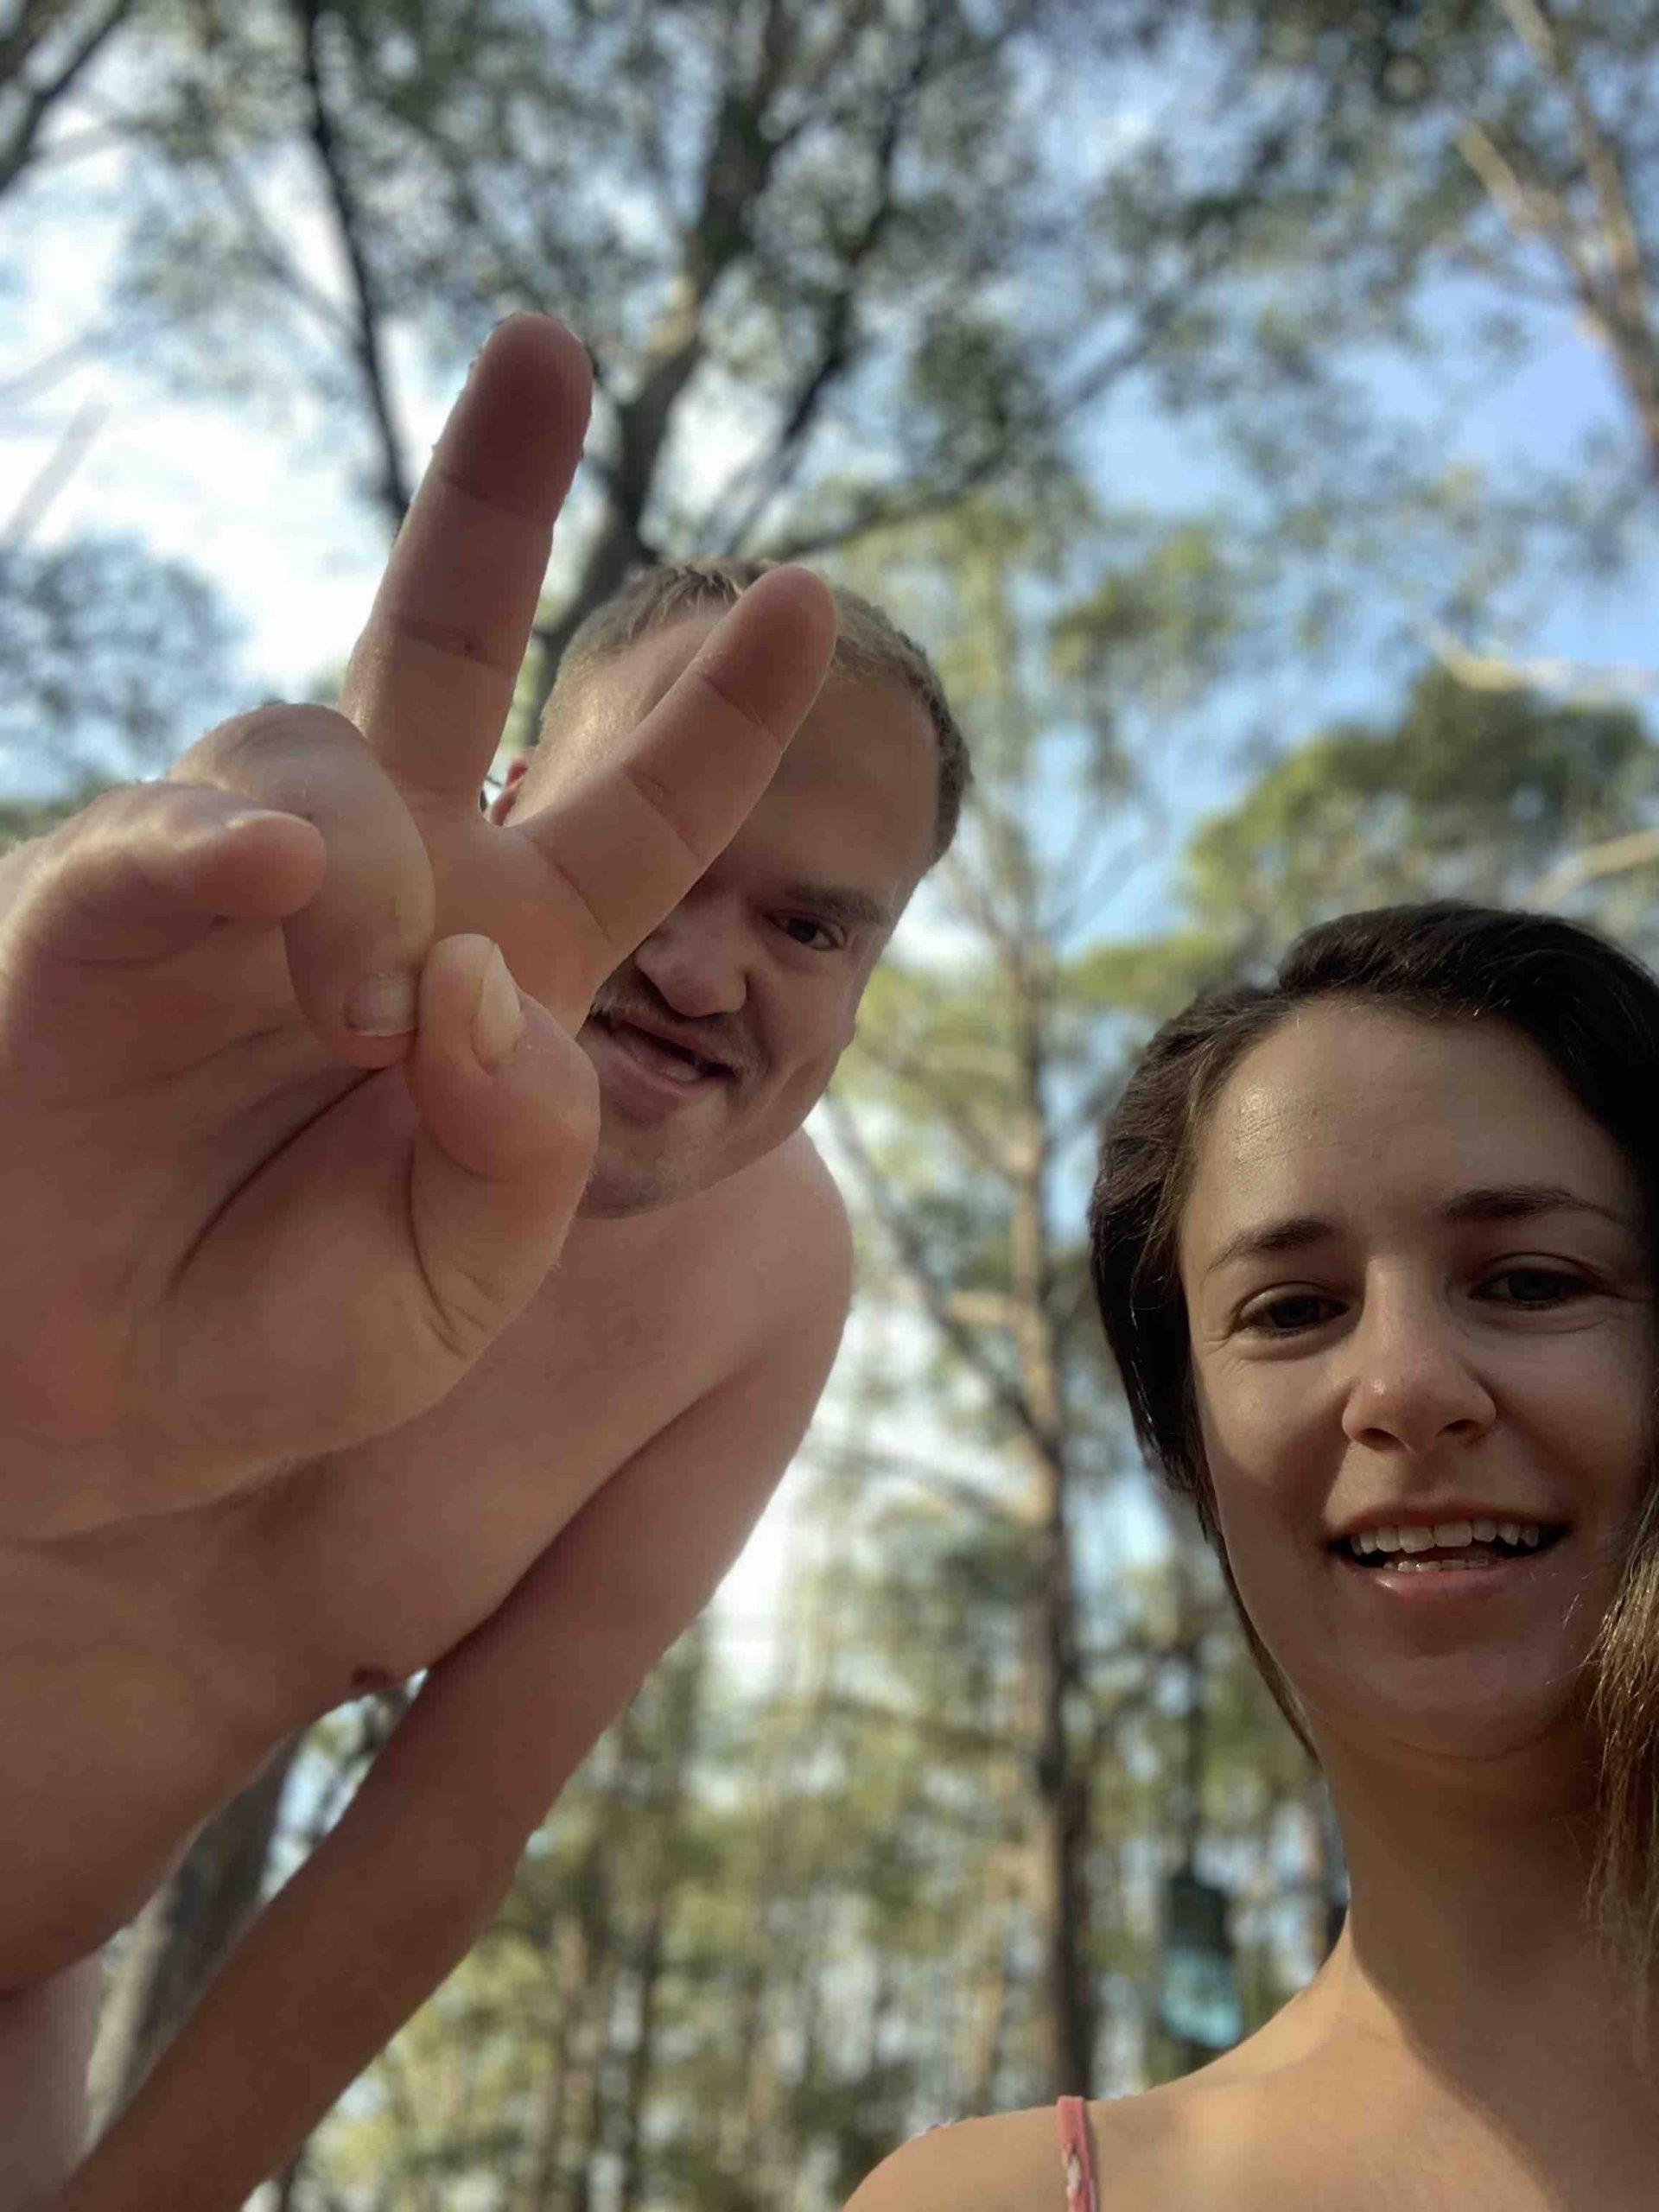 Man and woman taking a selfie